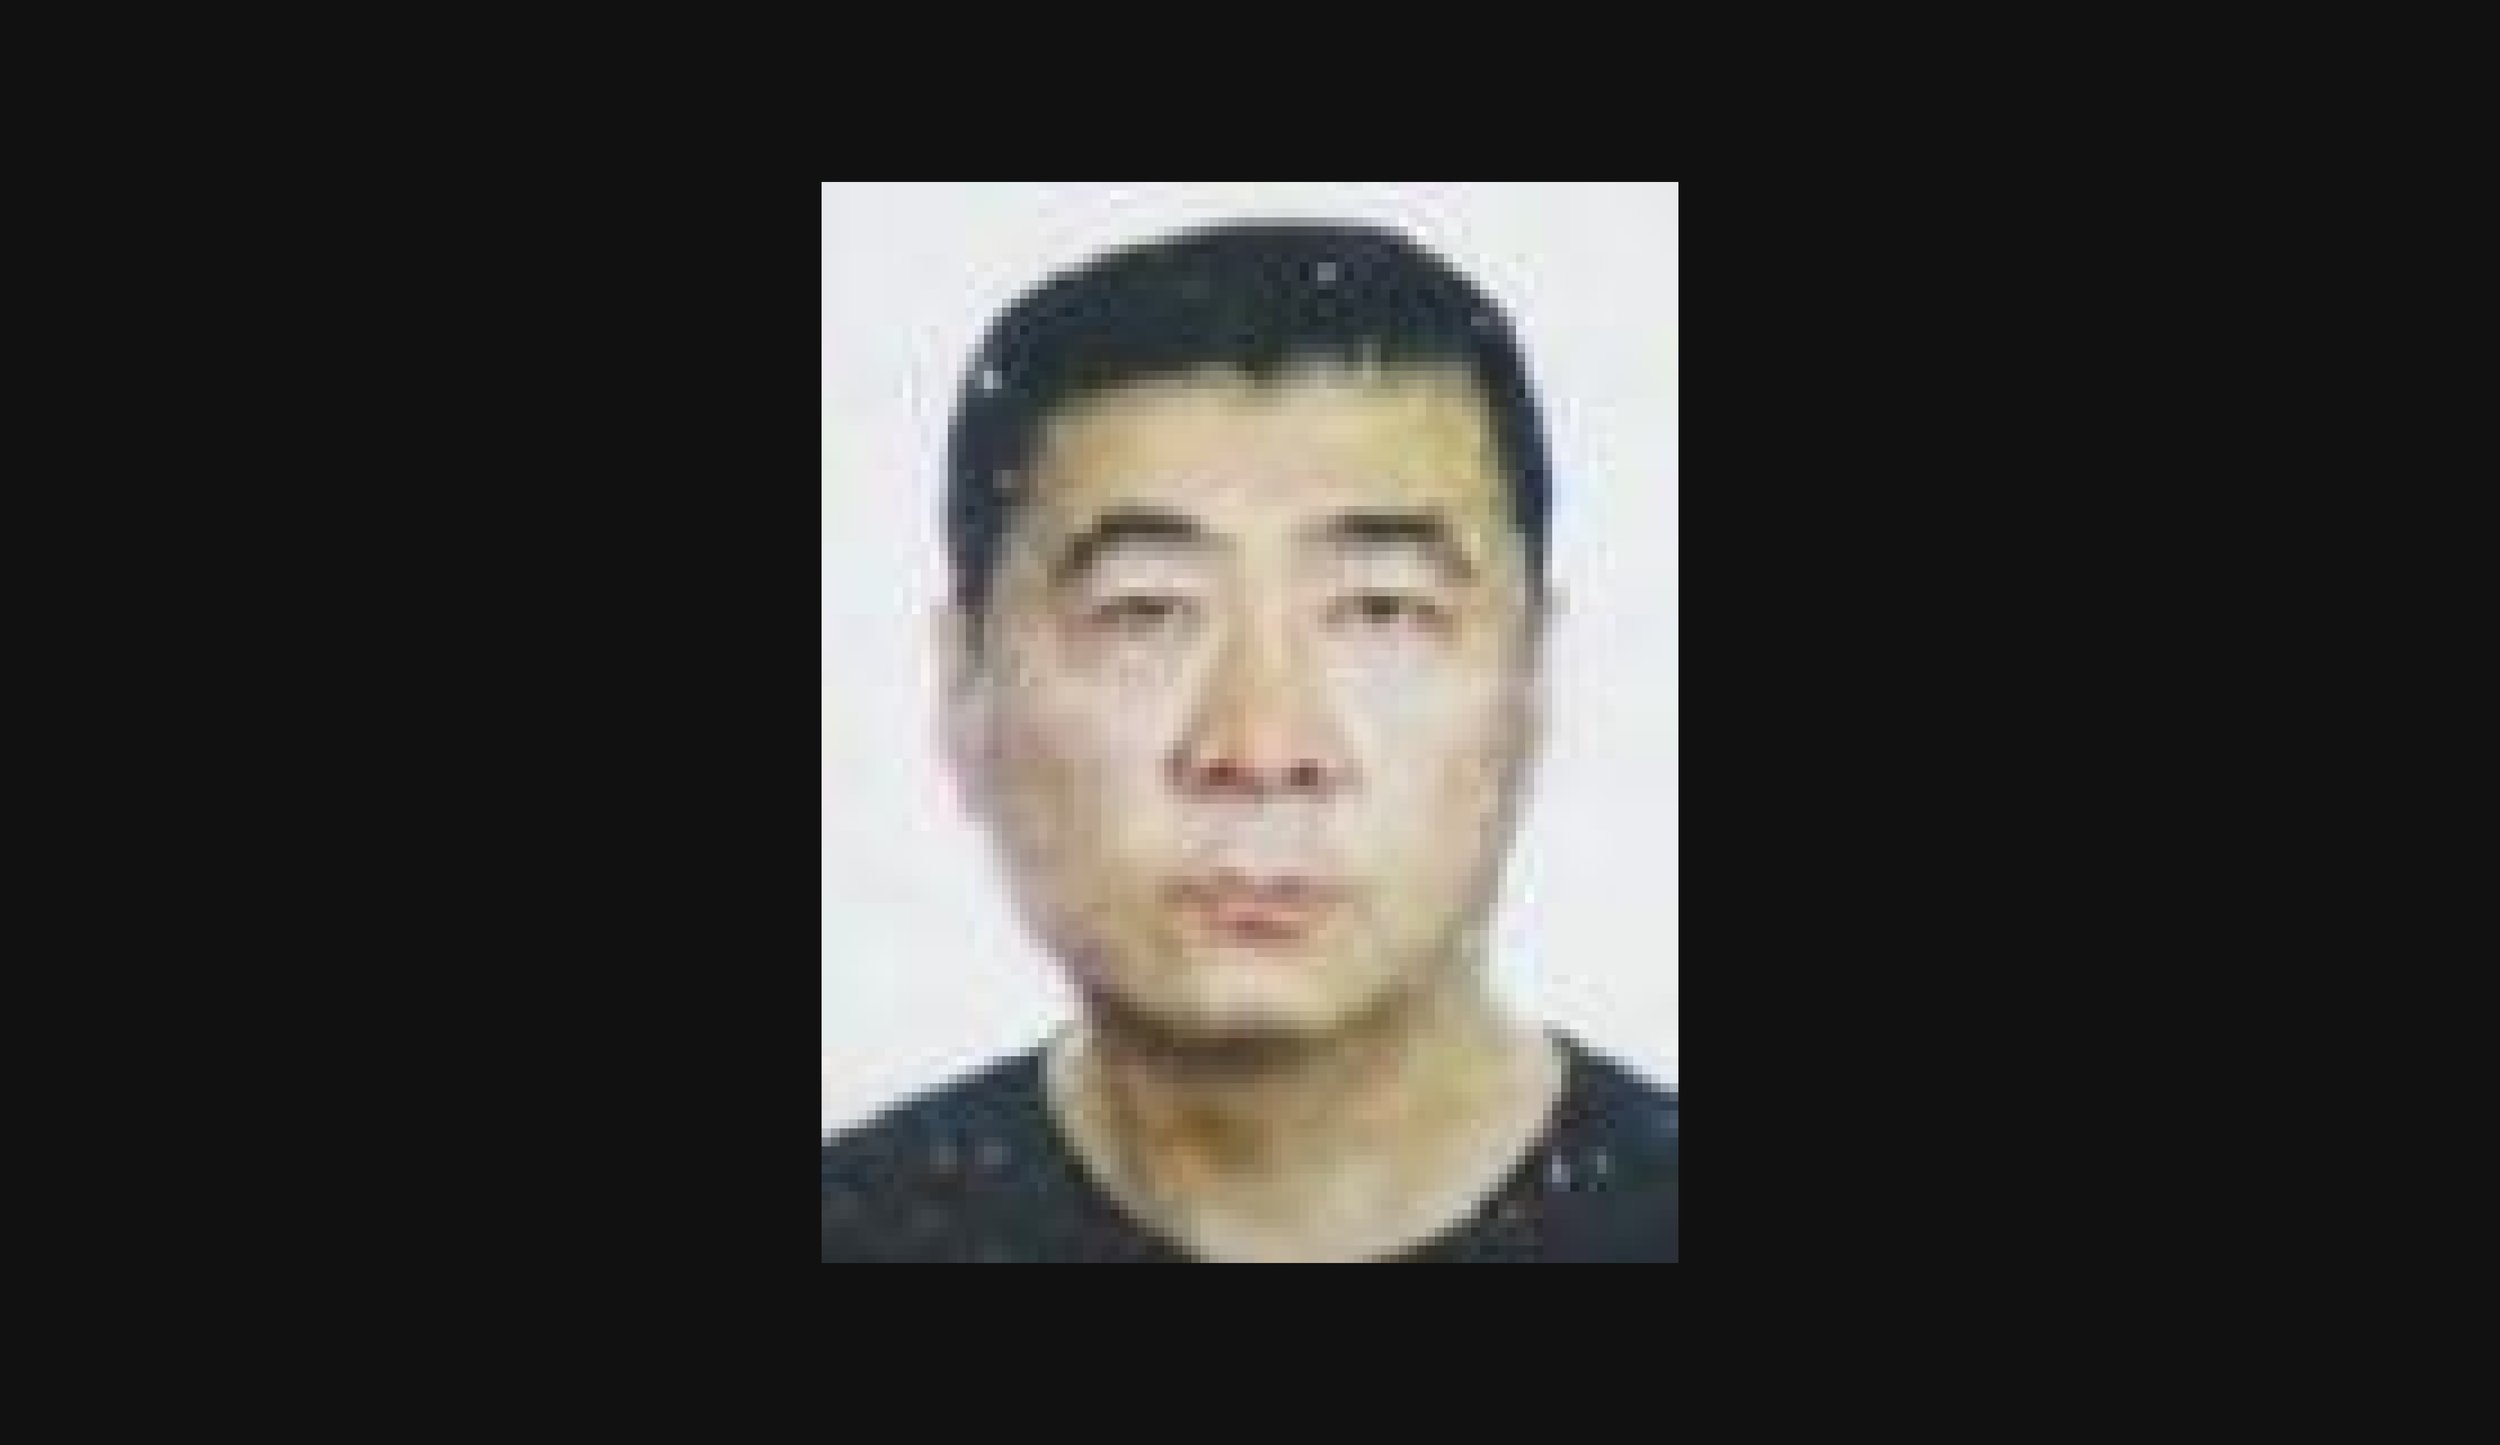  The crew consisted of 33 members, including management personnel such as: Captain → Li Chengquan (李承权) 